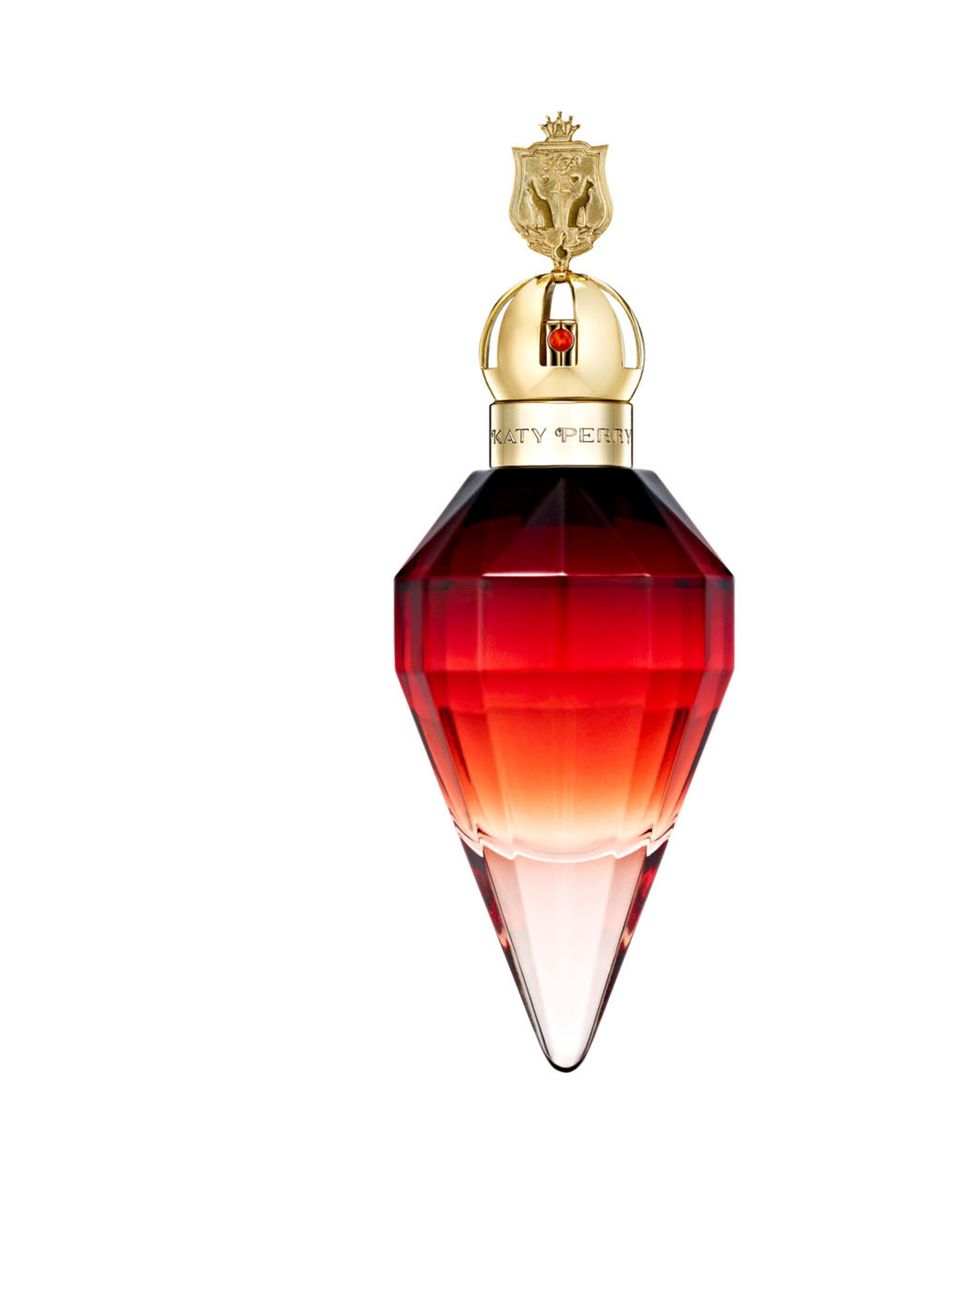 <p>Our September cover star, <a href="http://www.elleuk.com/star-style/celebrity-beauty/celeb-hair/katy-perry-the-original-colour-chameleon">Katy Perry</a>, has joined the celebrity fragrance ladder with this new feisty Killer Queen fragrance. <a href="ht